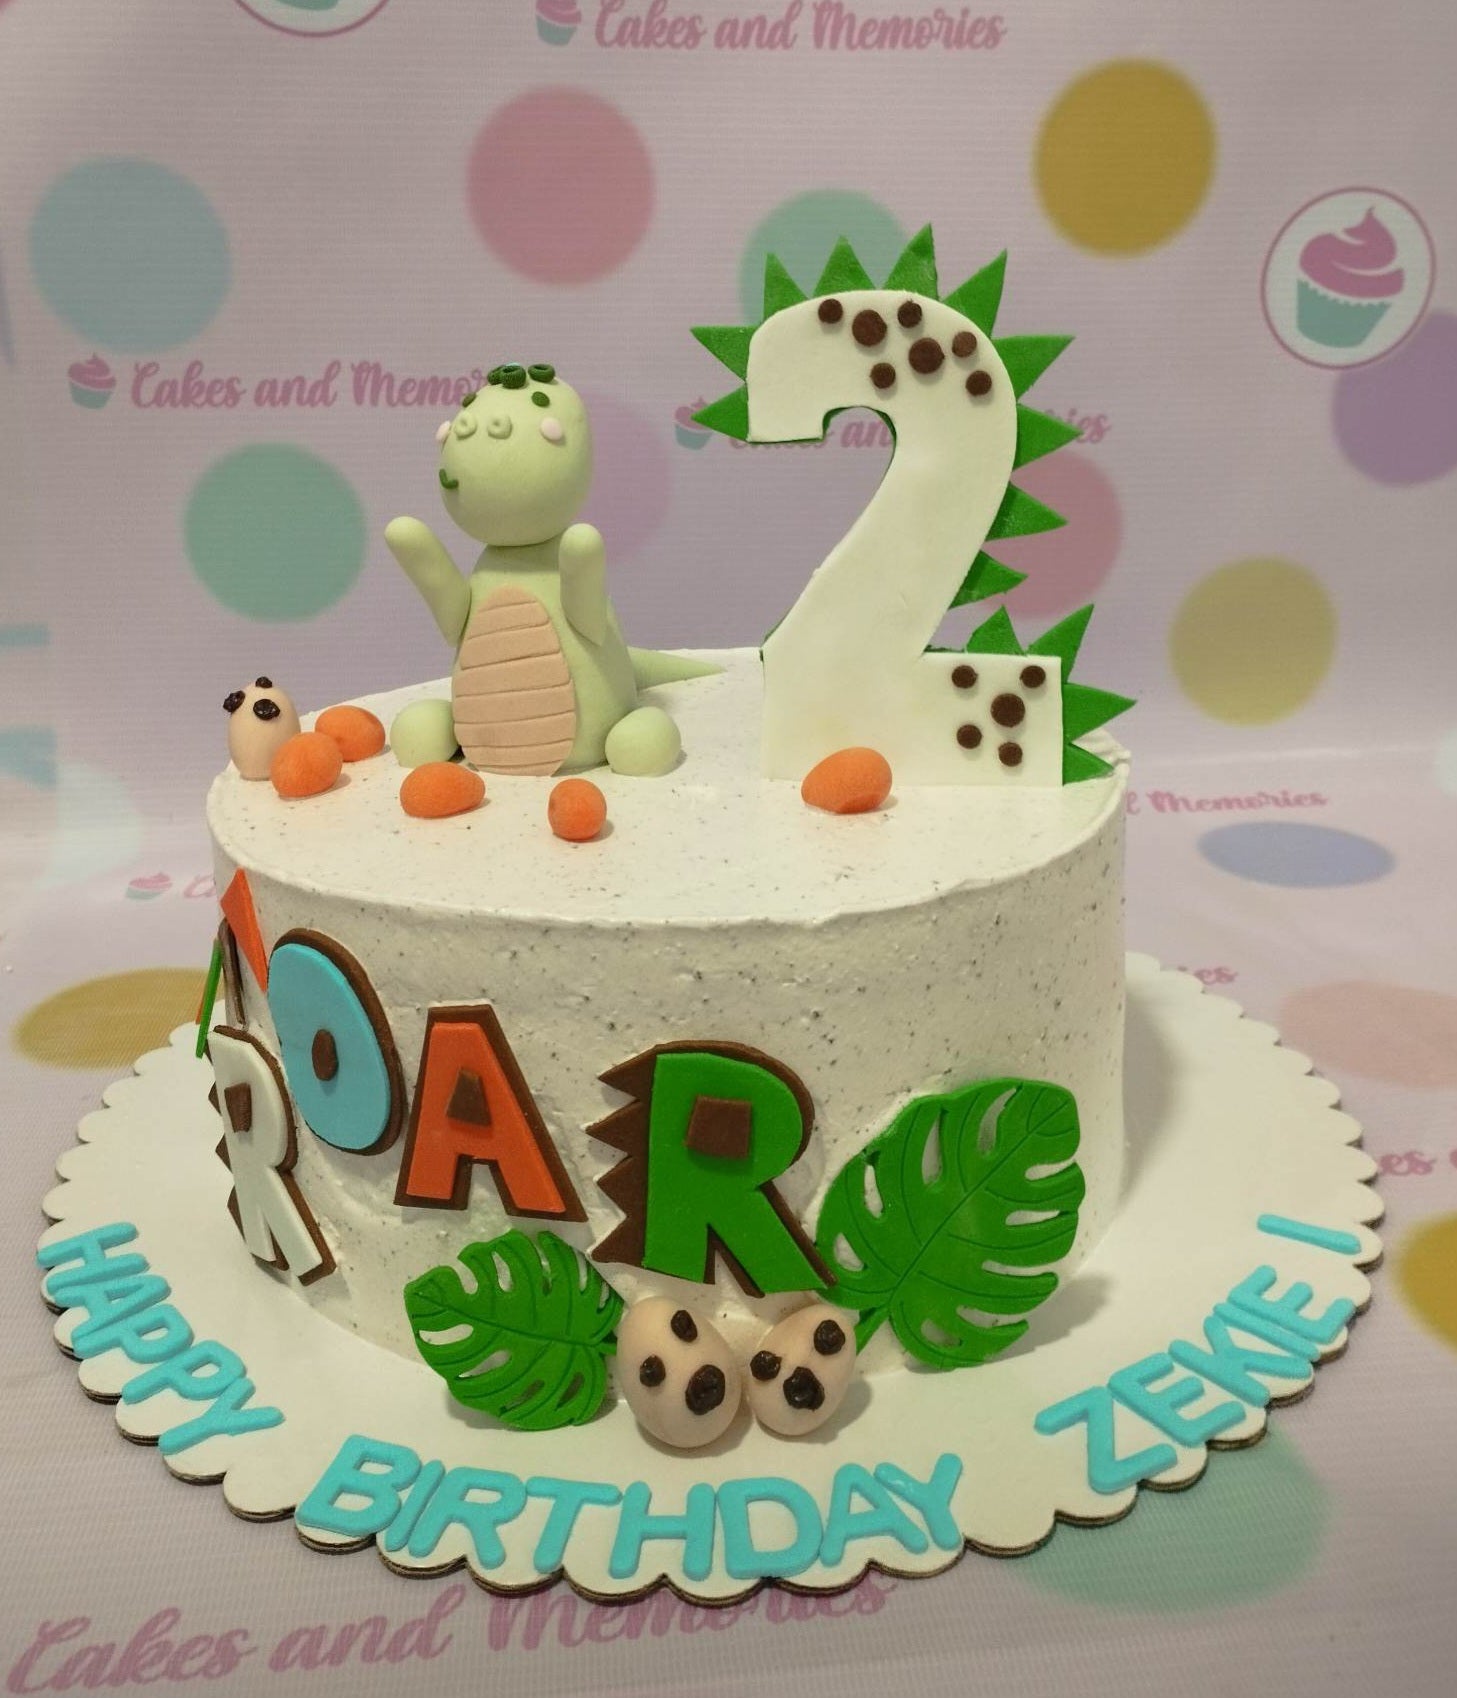 , Prehistoric

This Dinosaurs Cake is perfect for both kids and Jurassic fans alike. It is decorated with custom white, green and red designs, including a T-Rex, making it a perfect choice for your child's birthday cake. The quality of the cake is top-notch and it will capture the prehistoric theme perfectly.